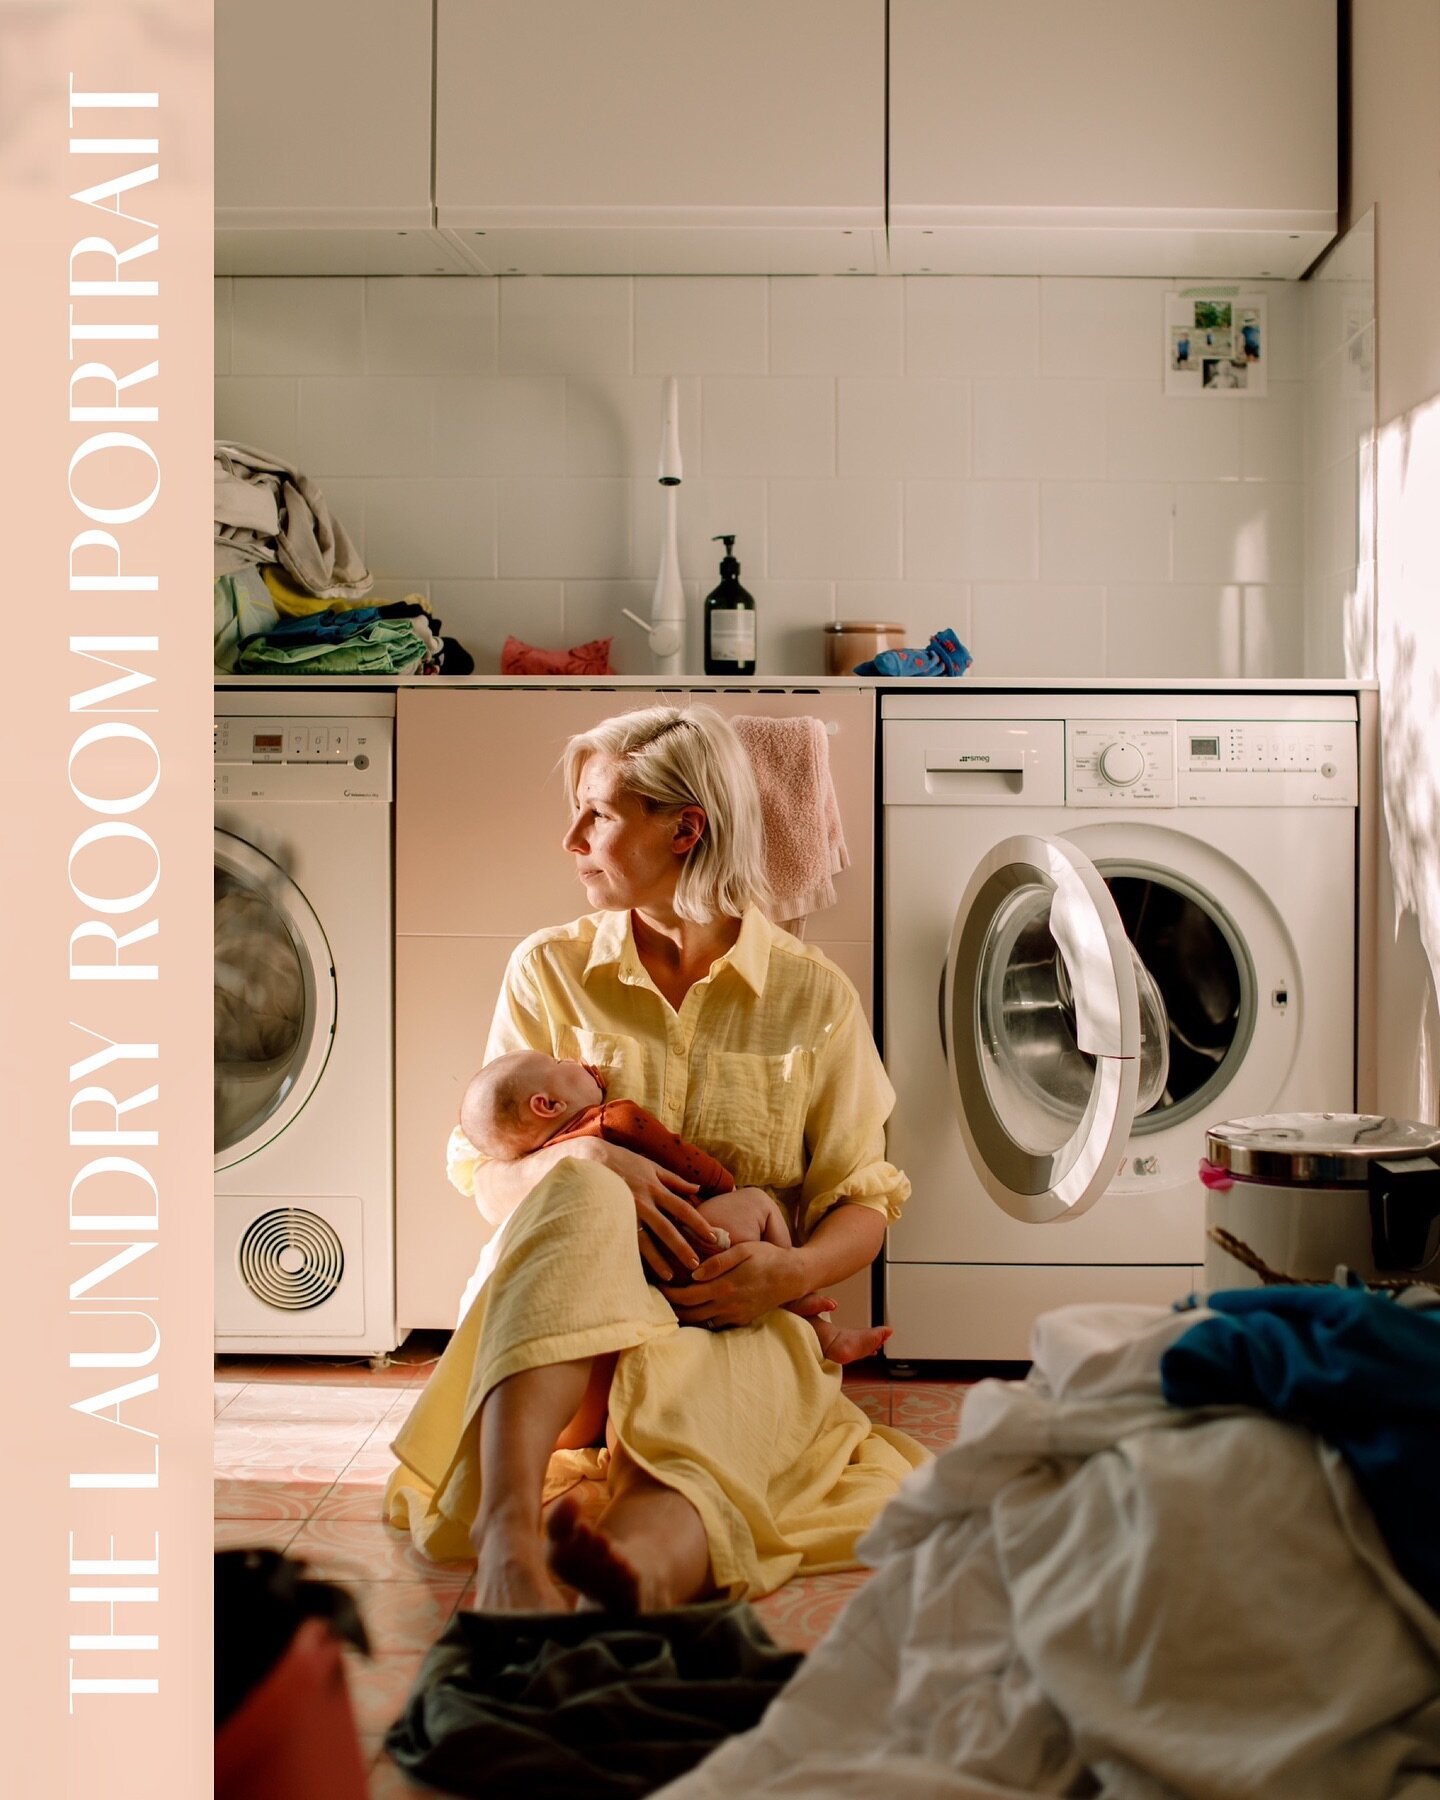 WOULD YOU CARE FOR A LAUNDRY ROOM PORTRAIT?
.
Ever since I created this I have thought of how fun it would be to make more of these laundry room portraits. With mother and baby. A cheeky toddler would be fun too. How is your laundry room? Do you have